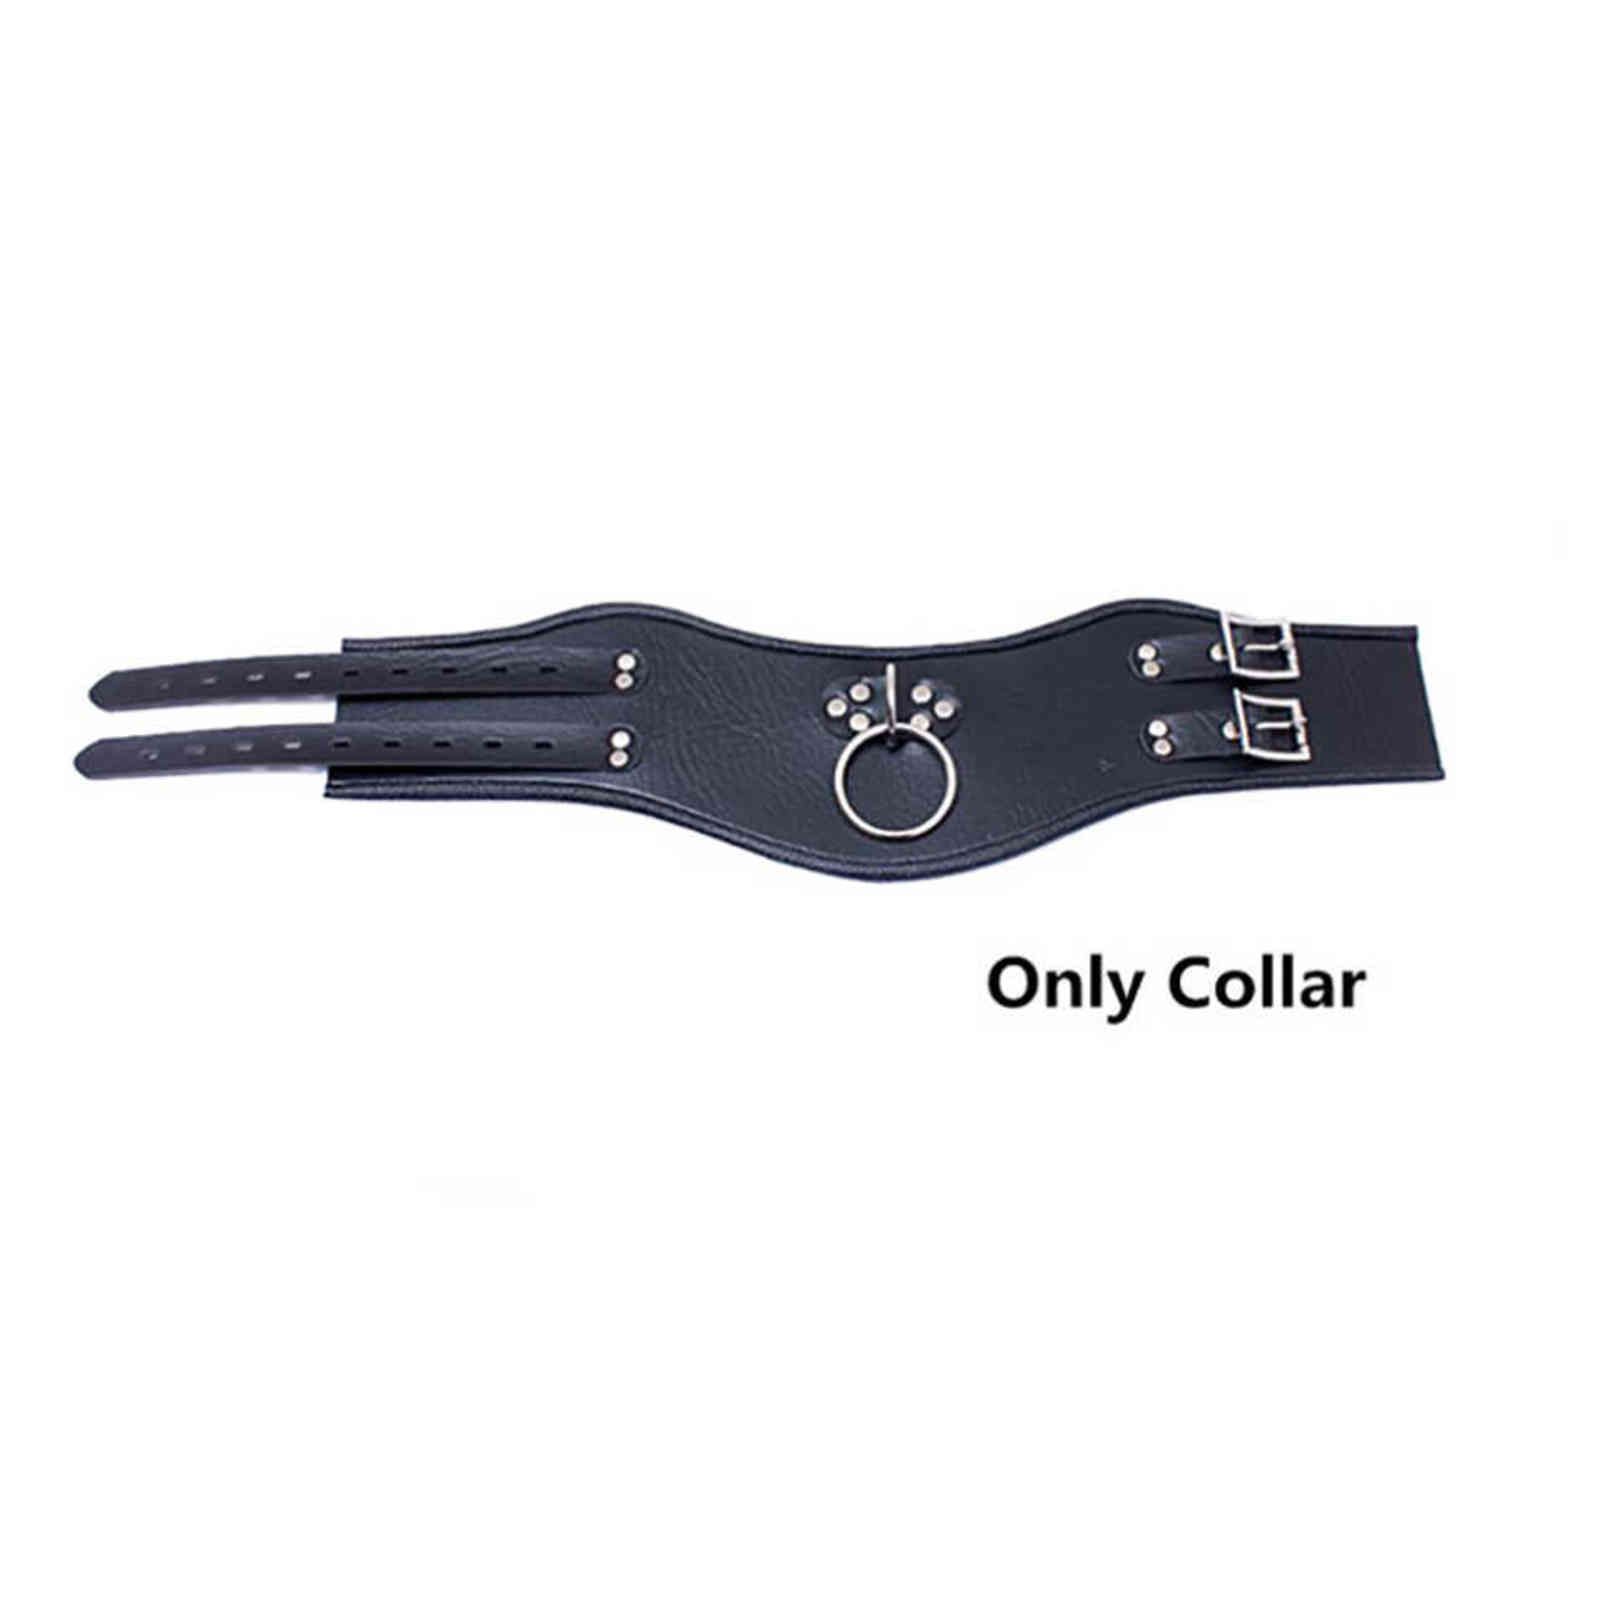 Only Collar